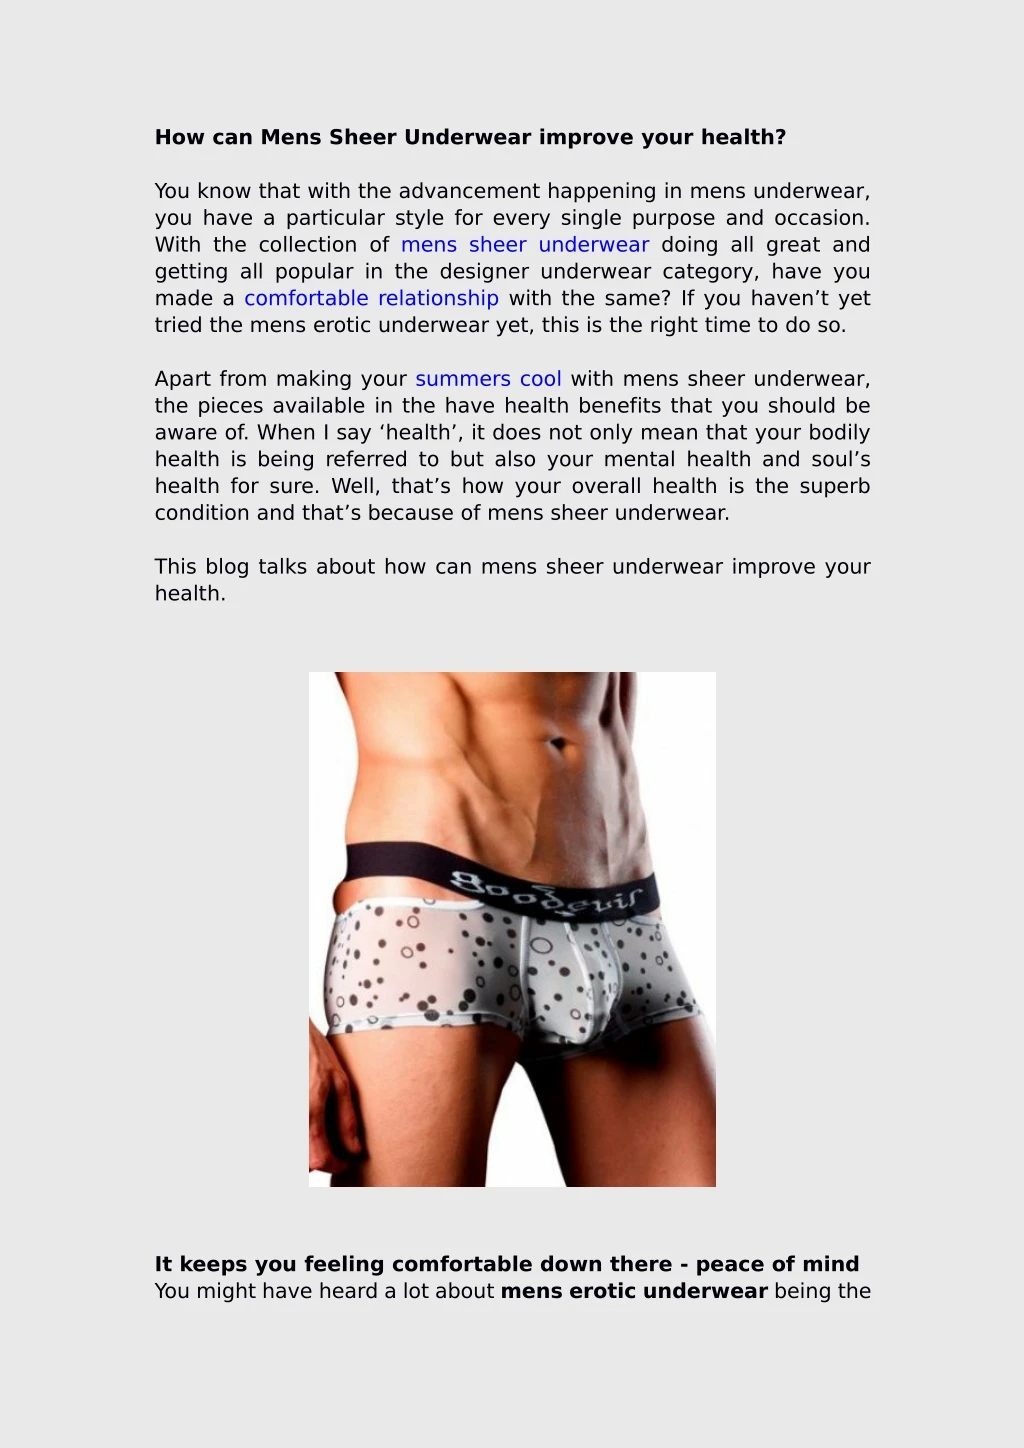 how can mens sheer underwear improve your health